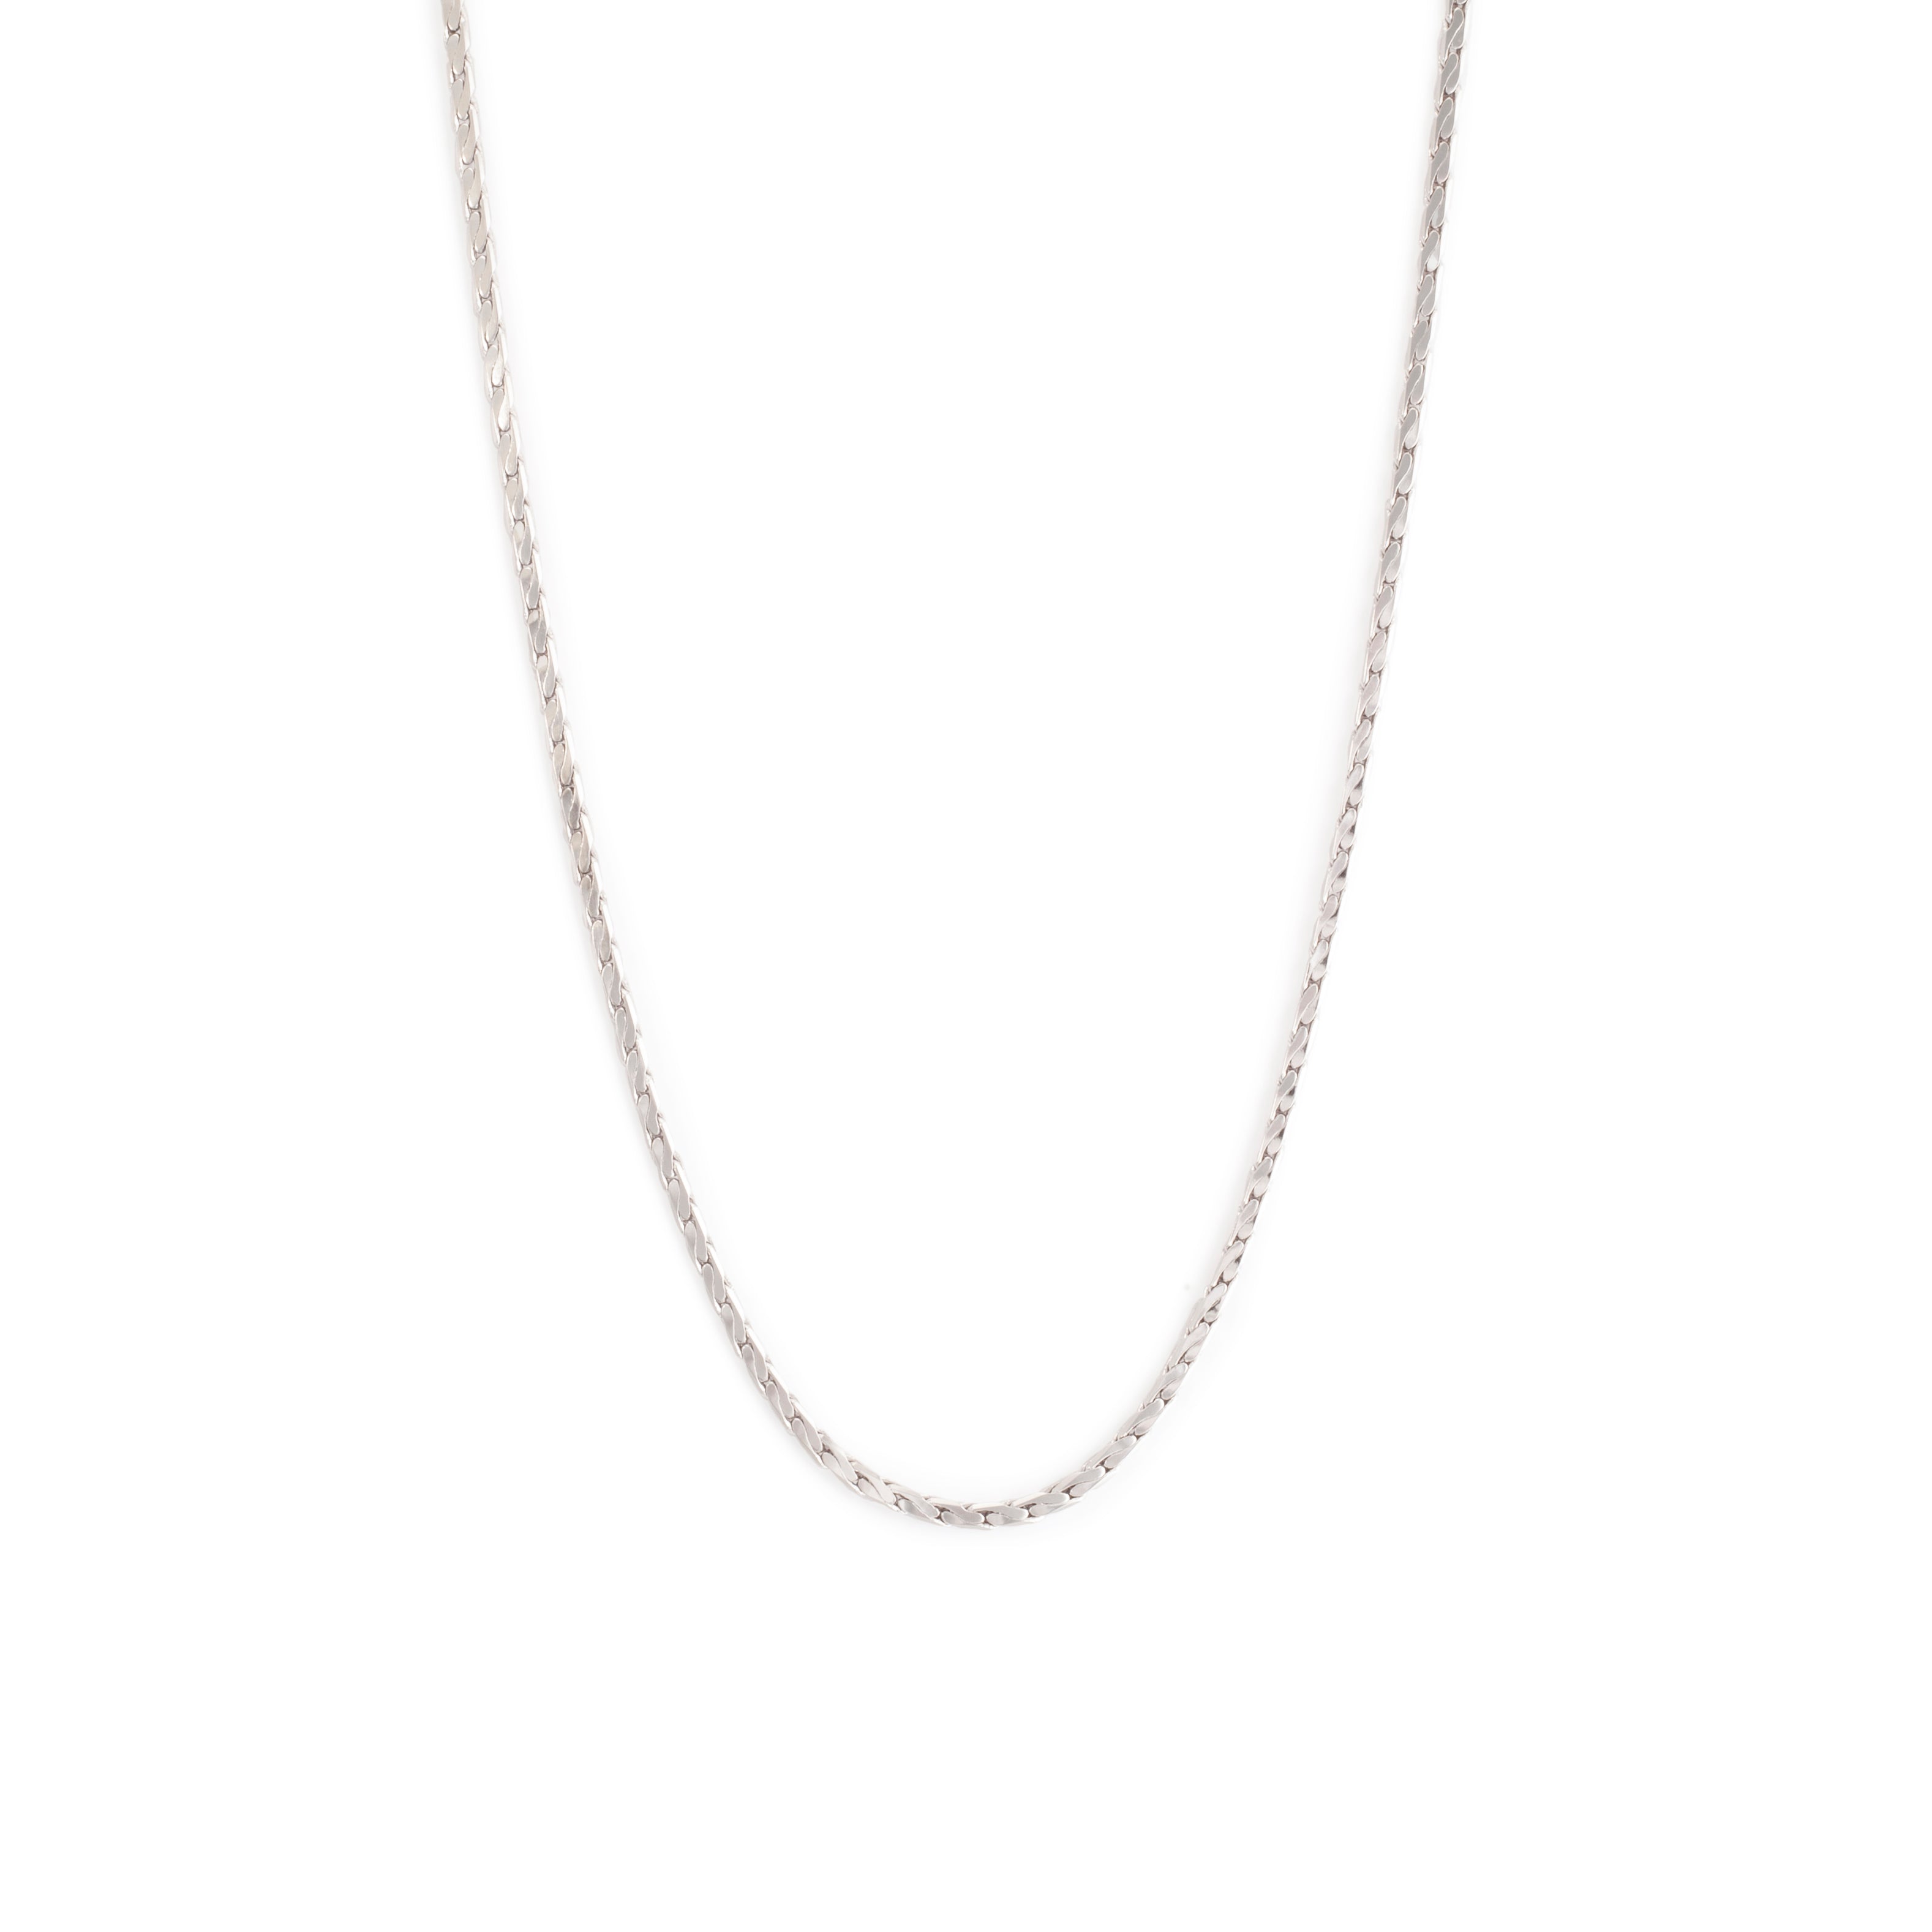 Silver tight link chain necklace